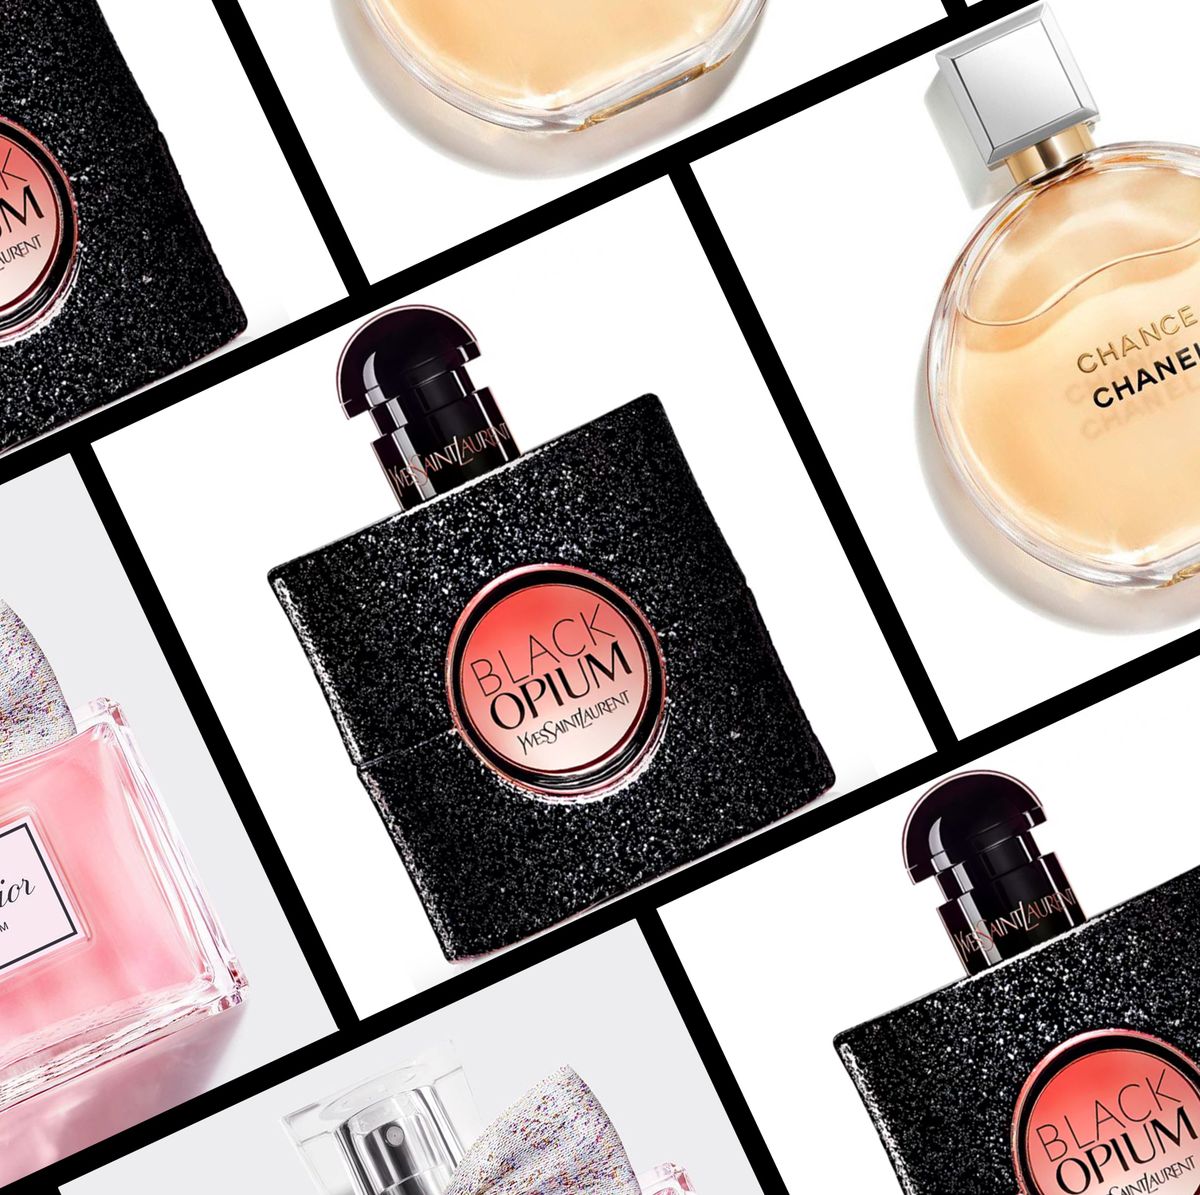 Discover the Top 10 Best Perfumes under 10000 for Your Signature Scent